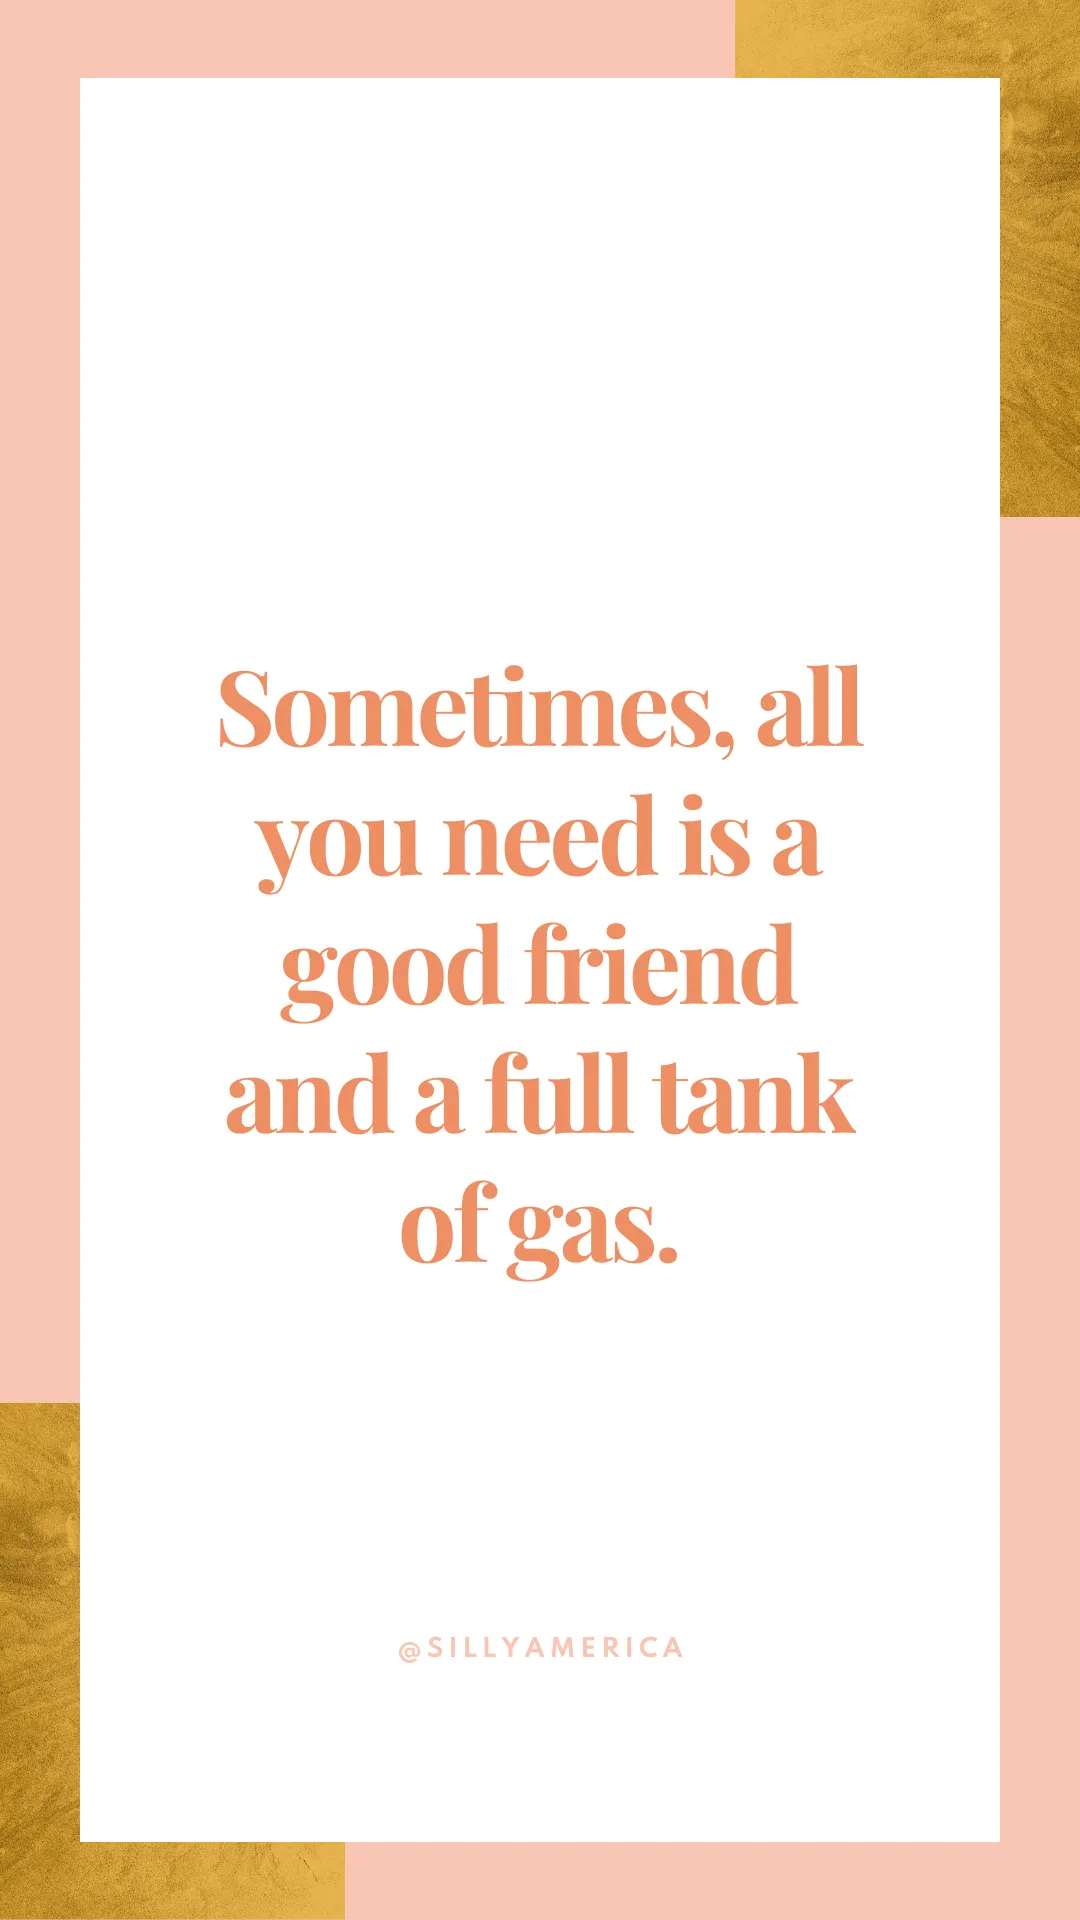 Sometimes, all you need is a good friend and a full tank of gas. - Road Trip Captions for Instagram